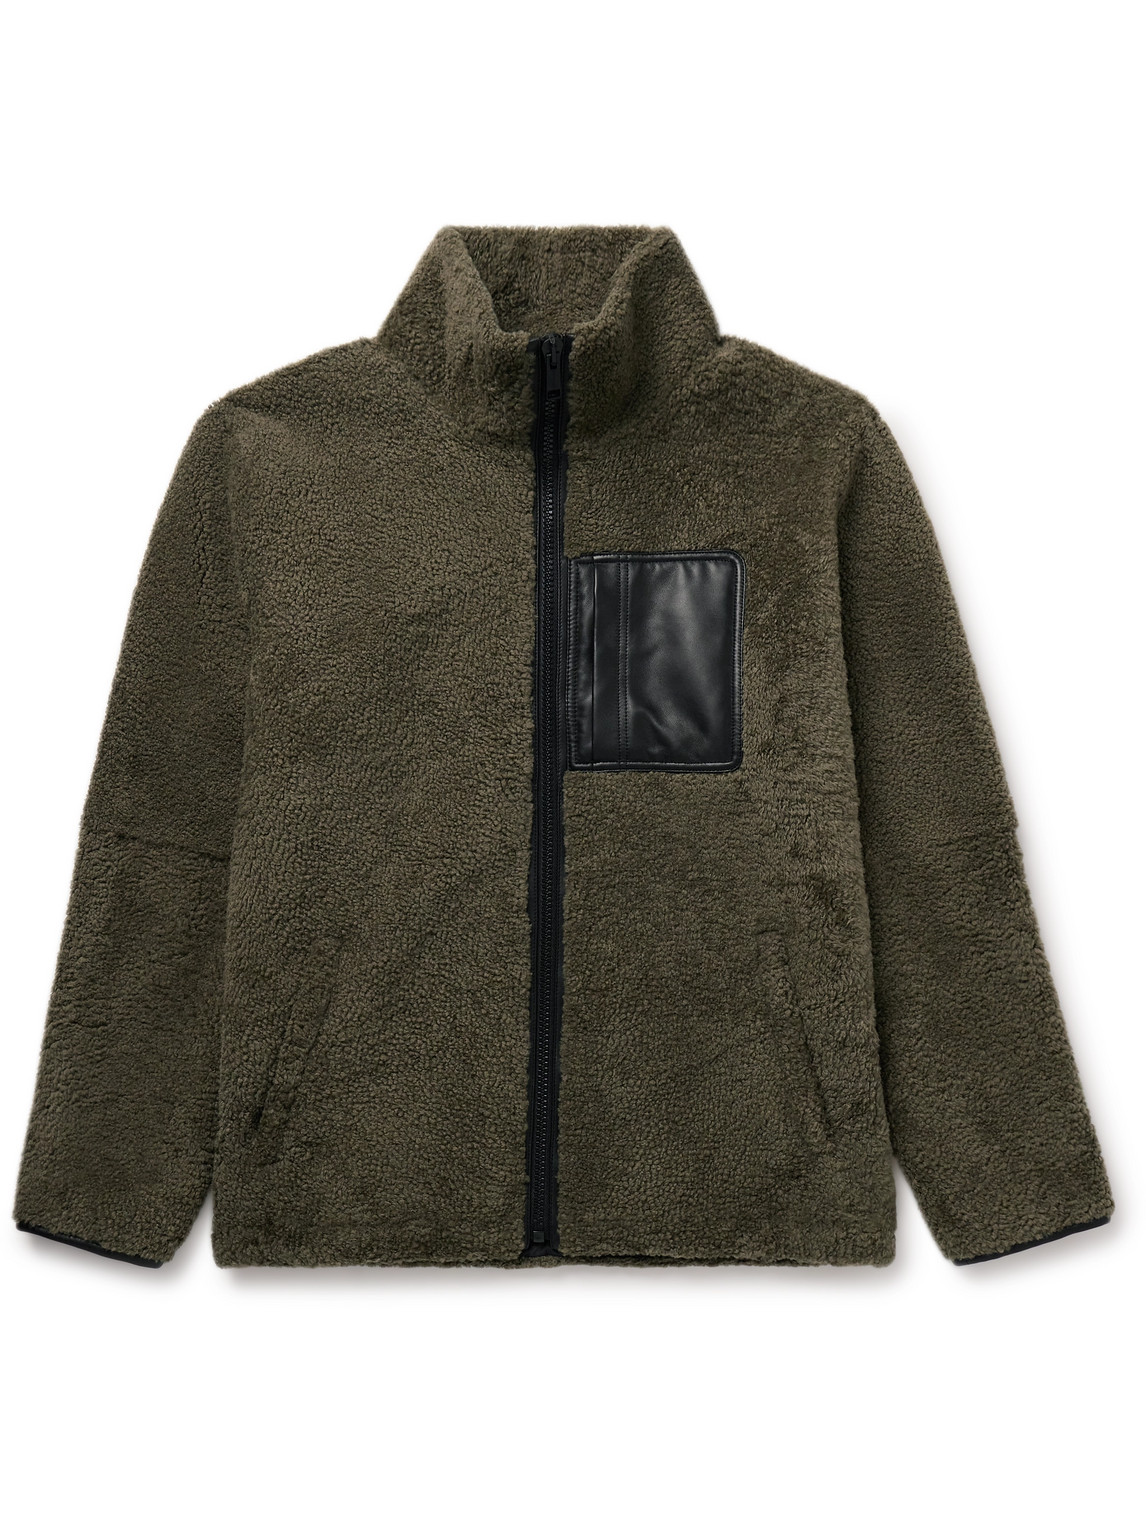 Yves Salomon - Reversible Leather-Trimmed Shearling and Shell Jacket - Men - Green - IT 46 von Yves Salomon